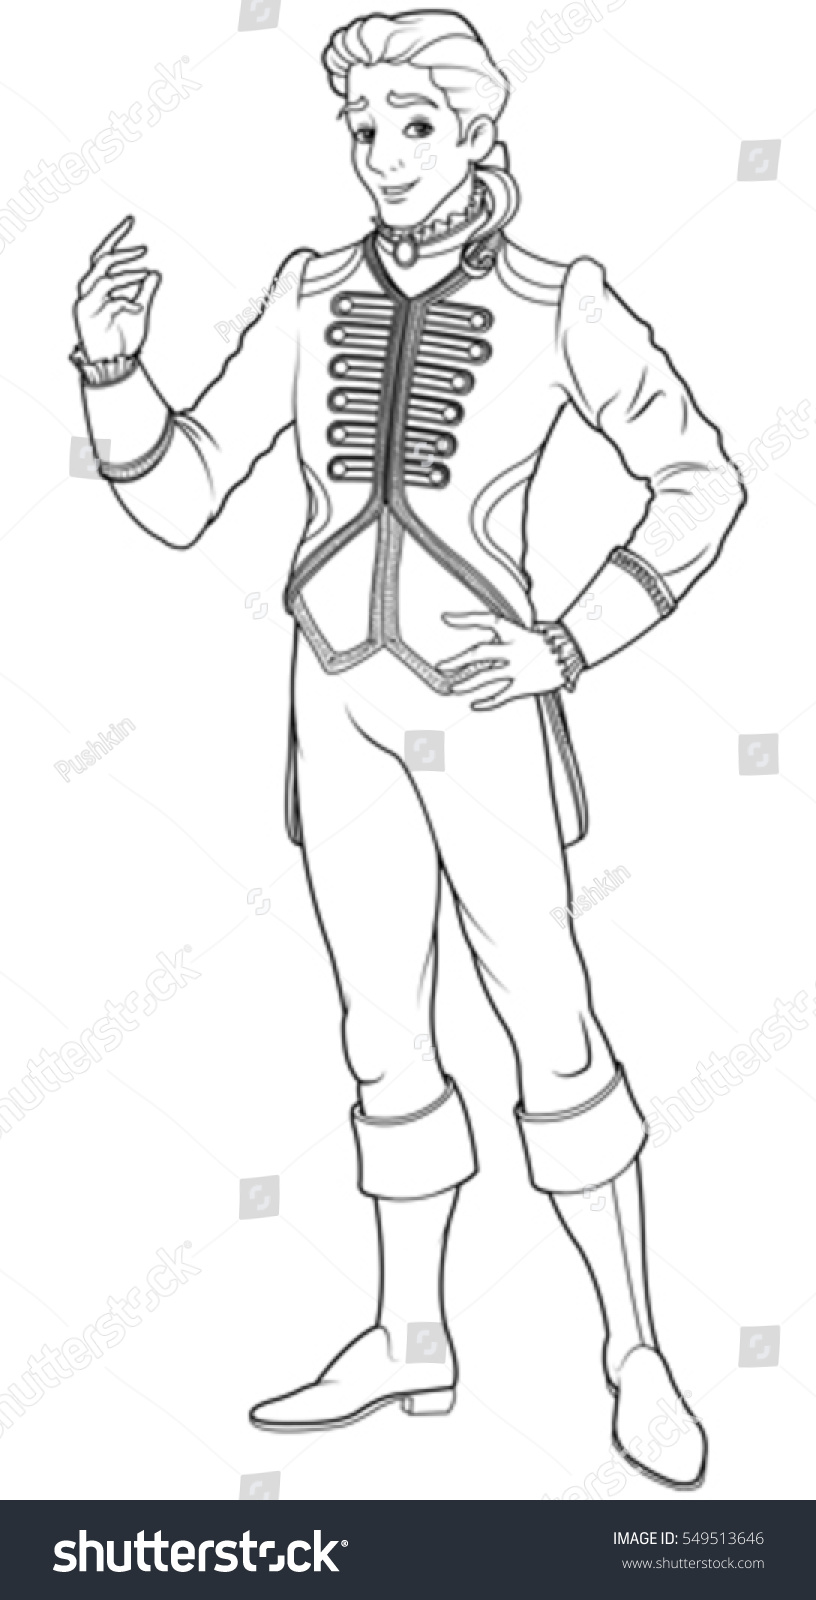 Prince Charming Coloring Page Stock Vector 549513646 ...